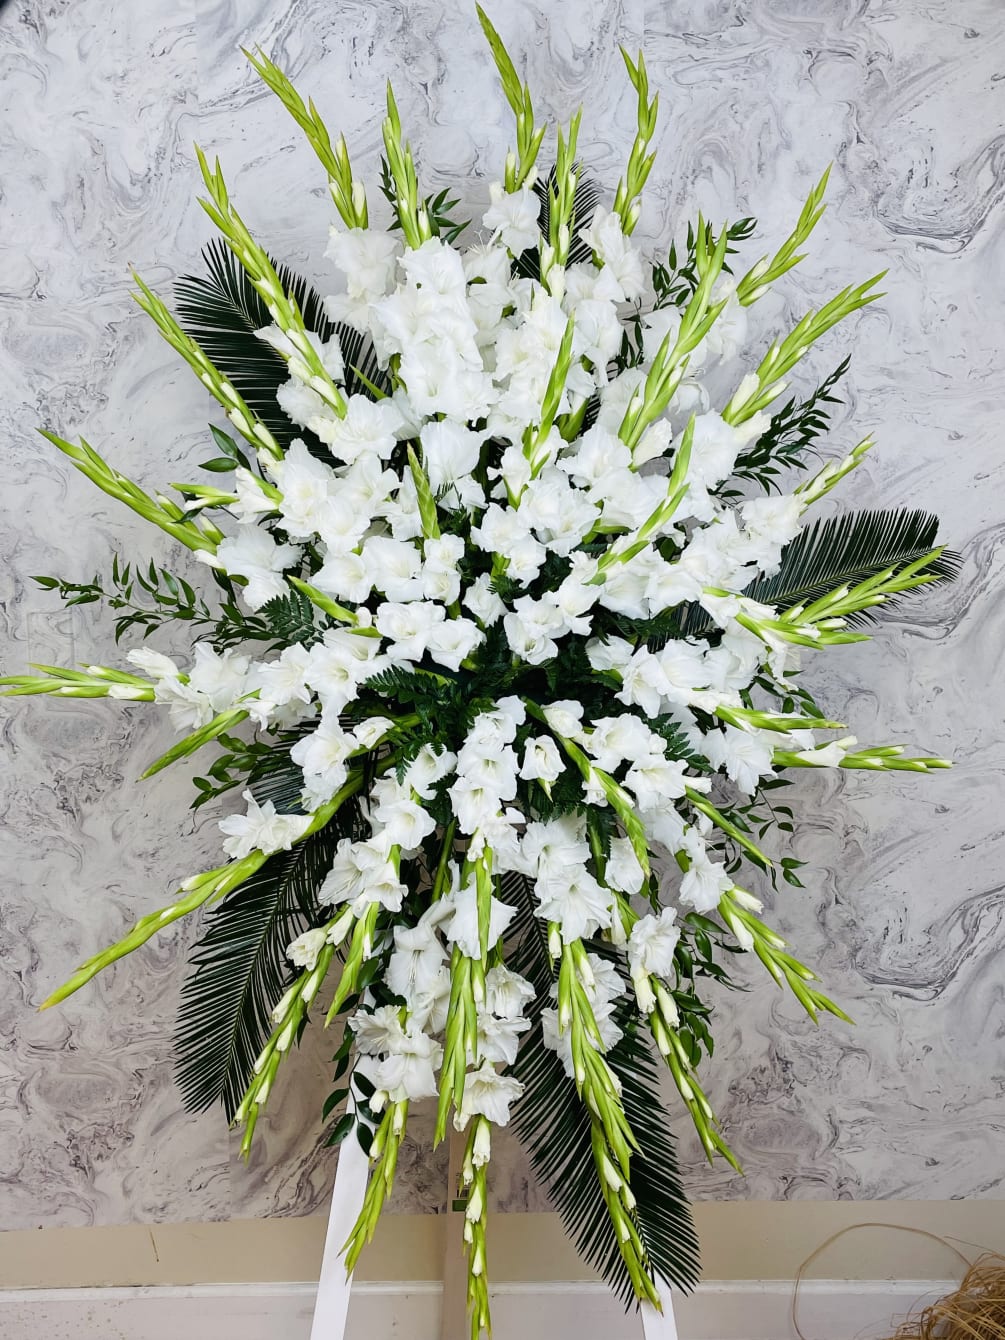 *NEW*
Send your deepest condolences with these Gladiolus Wooden Standing Spray for the